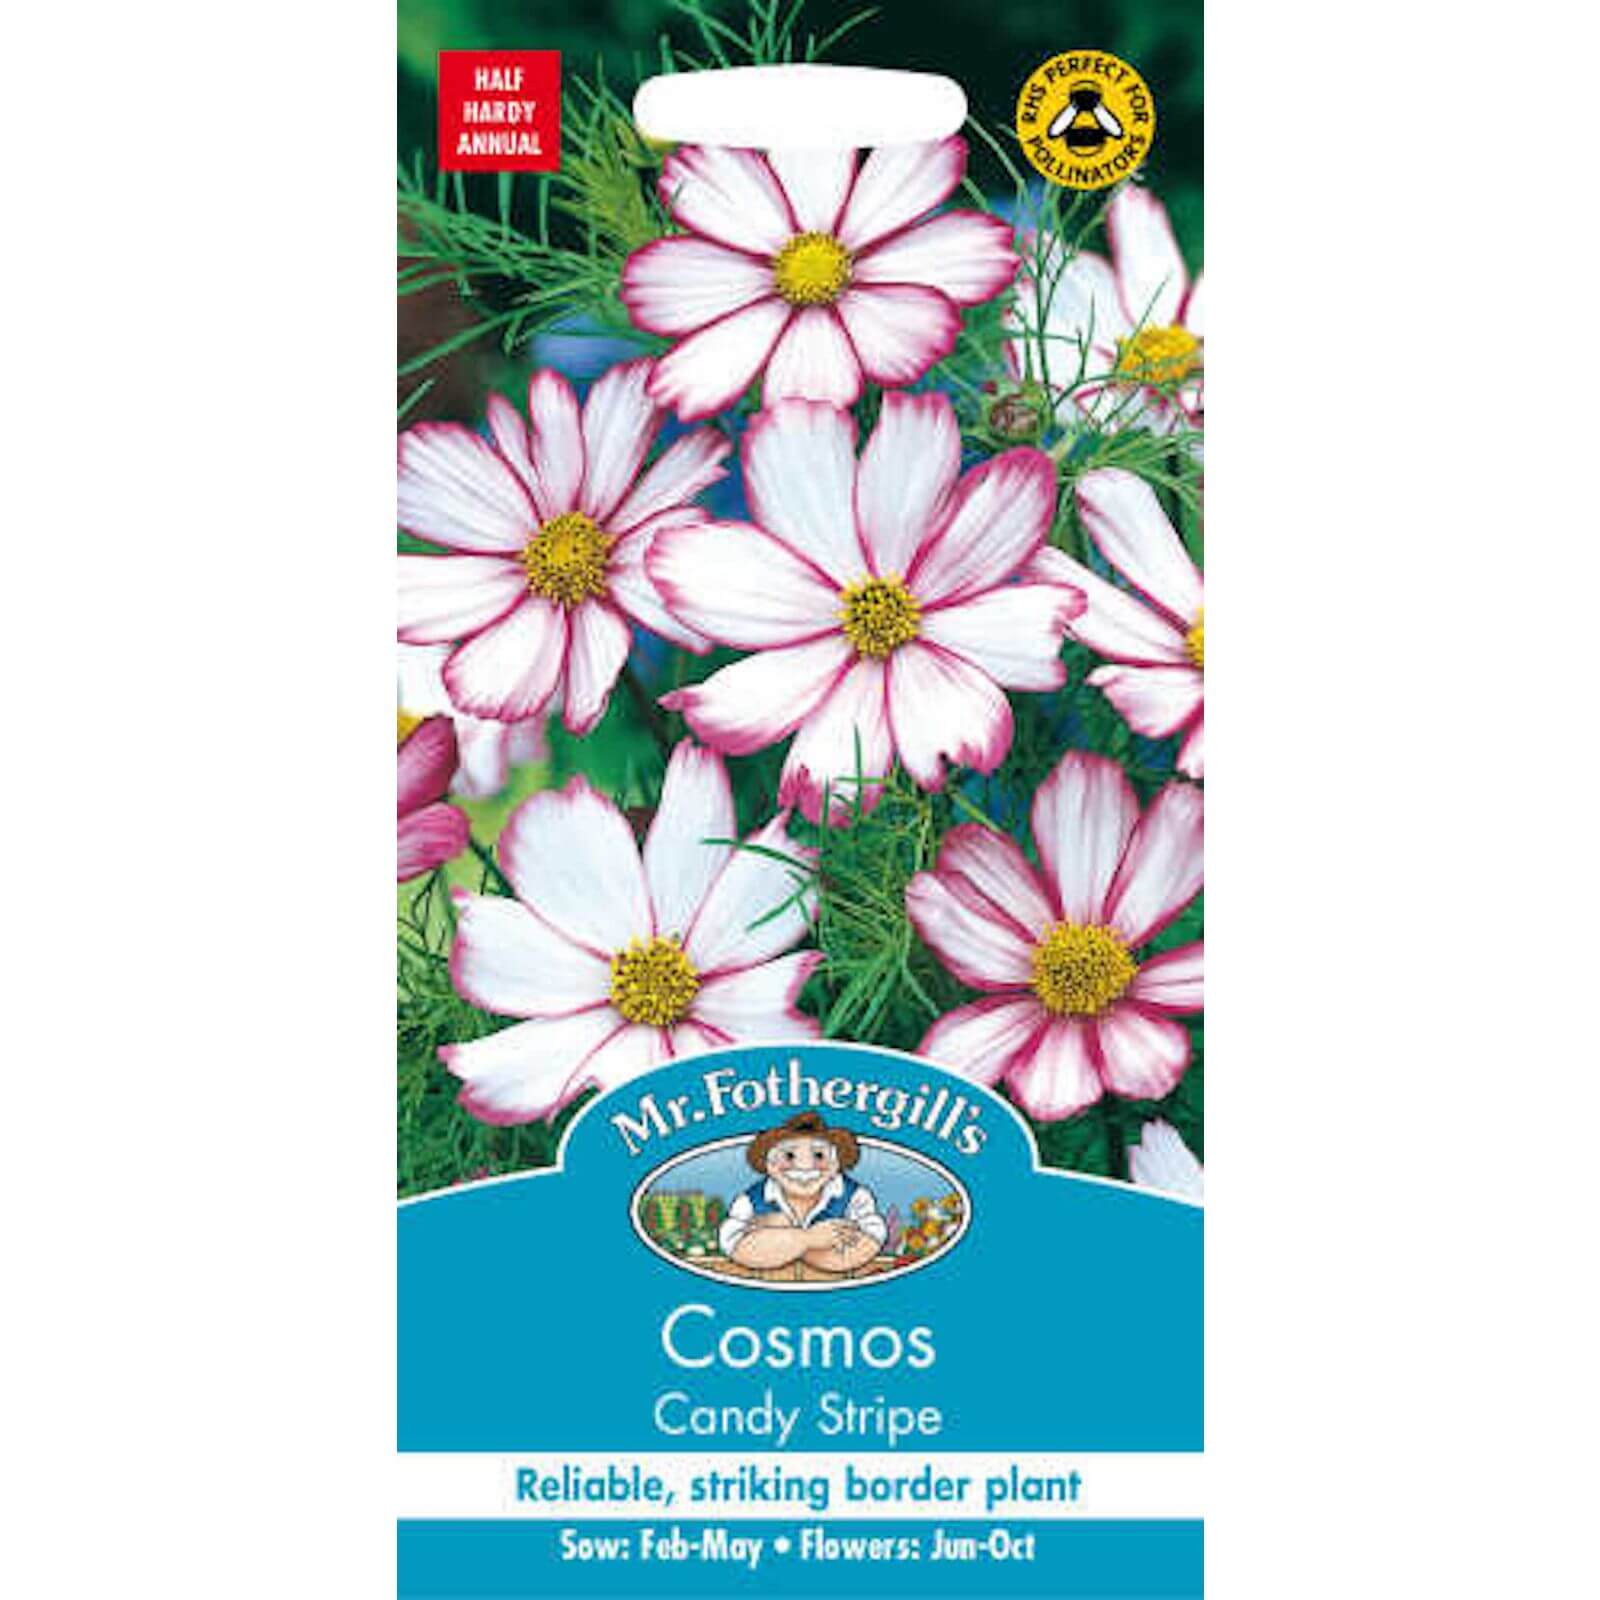 Mr. Fothergill's Cosmos Candy Stripe Seeds